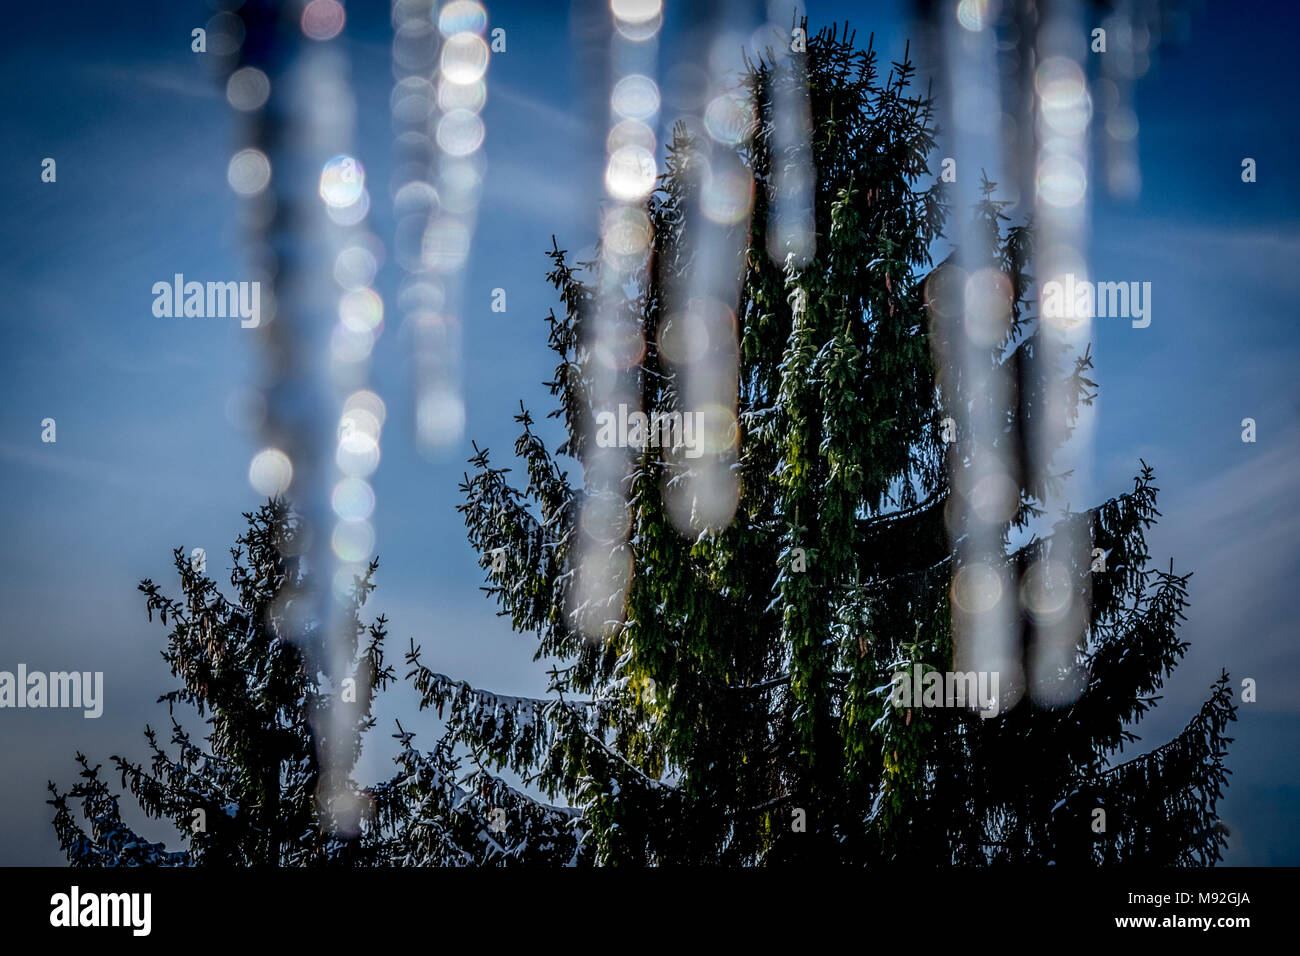 Snowy pine trees at the sunny winter morning. Snowy pine trees, blue sky in background, blurred icicles in the foreground. Stock Photo